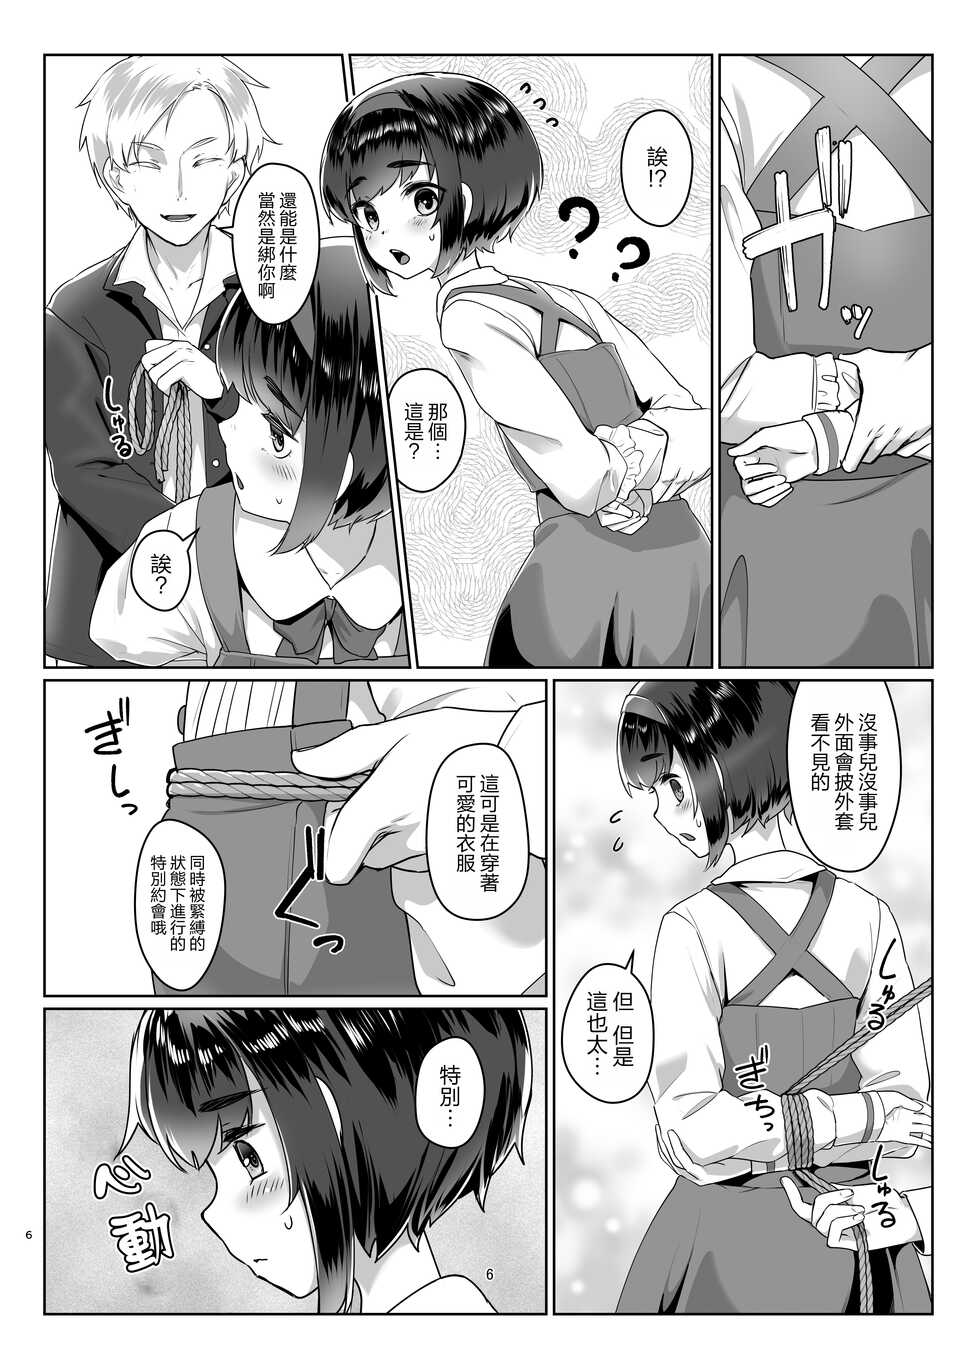 [face to face (ryoattoryo)] Tooi Hinata 2 [Chinese] [AX個人漢化] [Digital] - Page 6